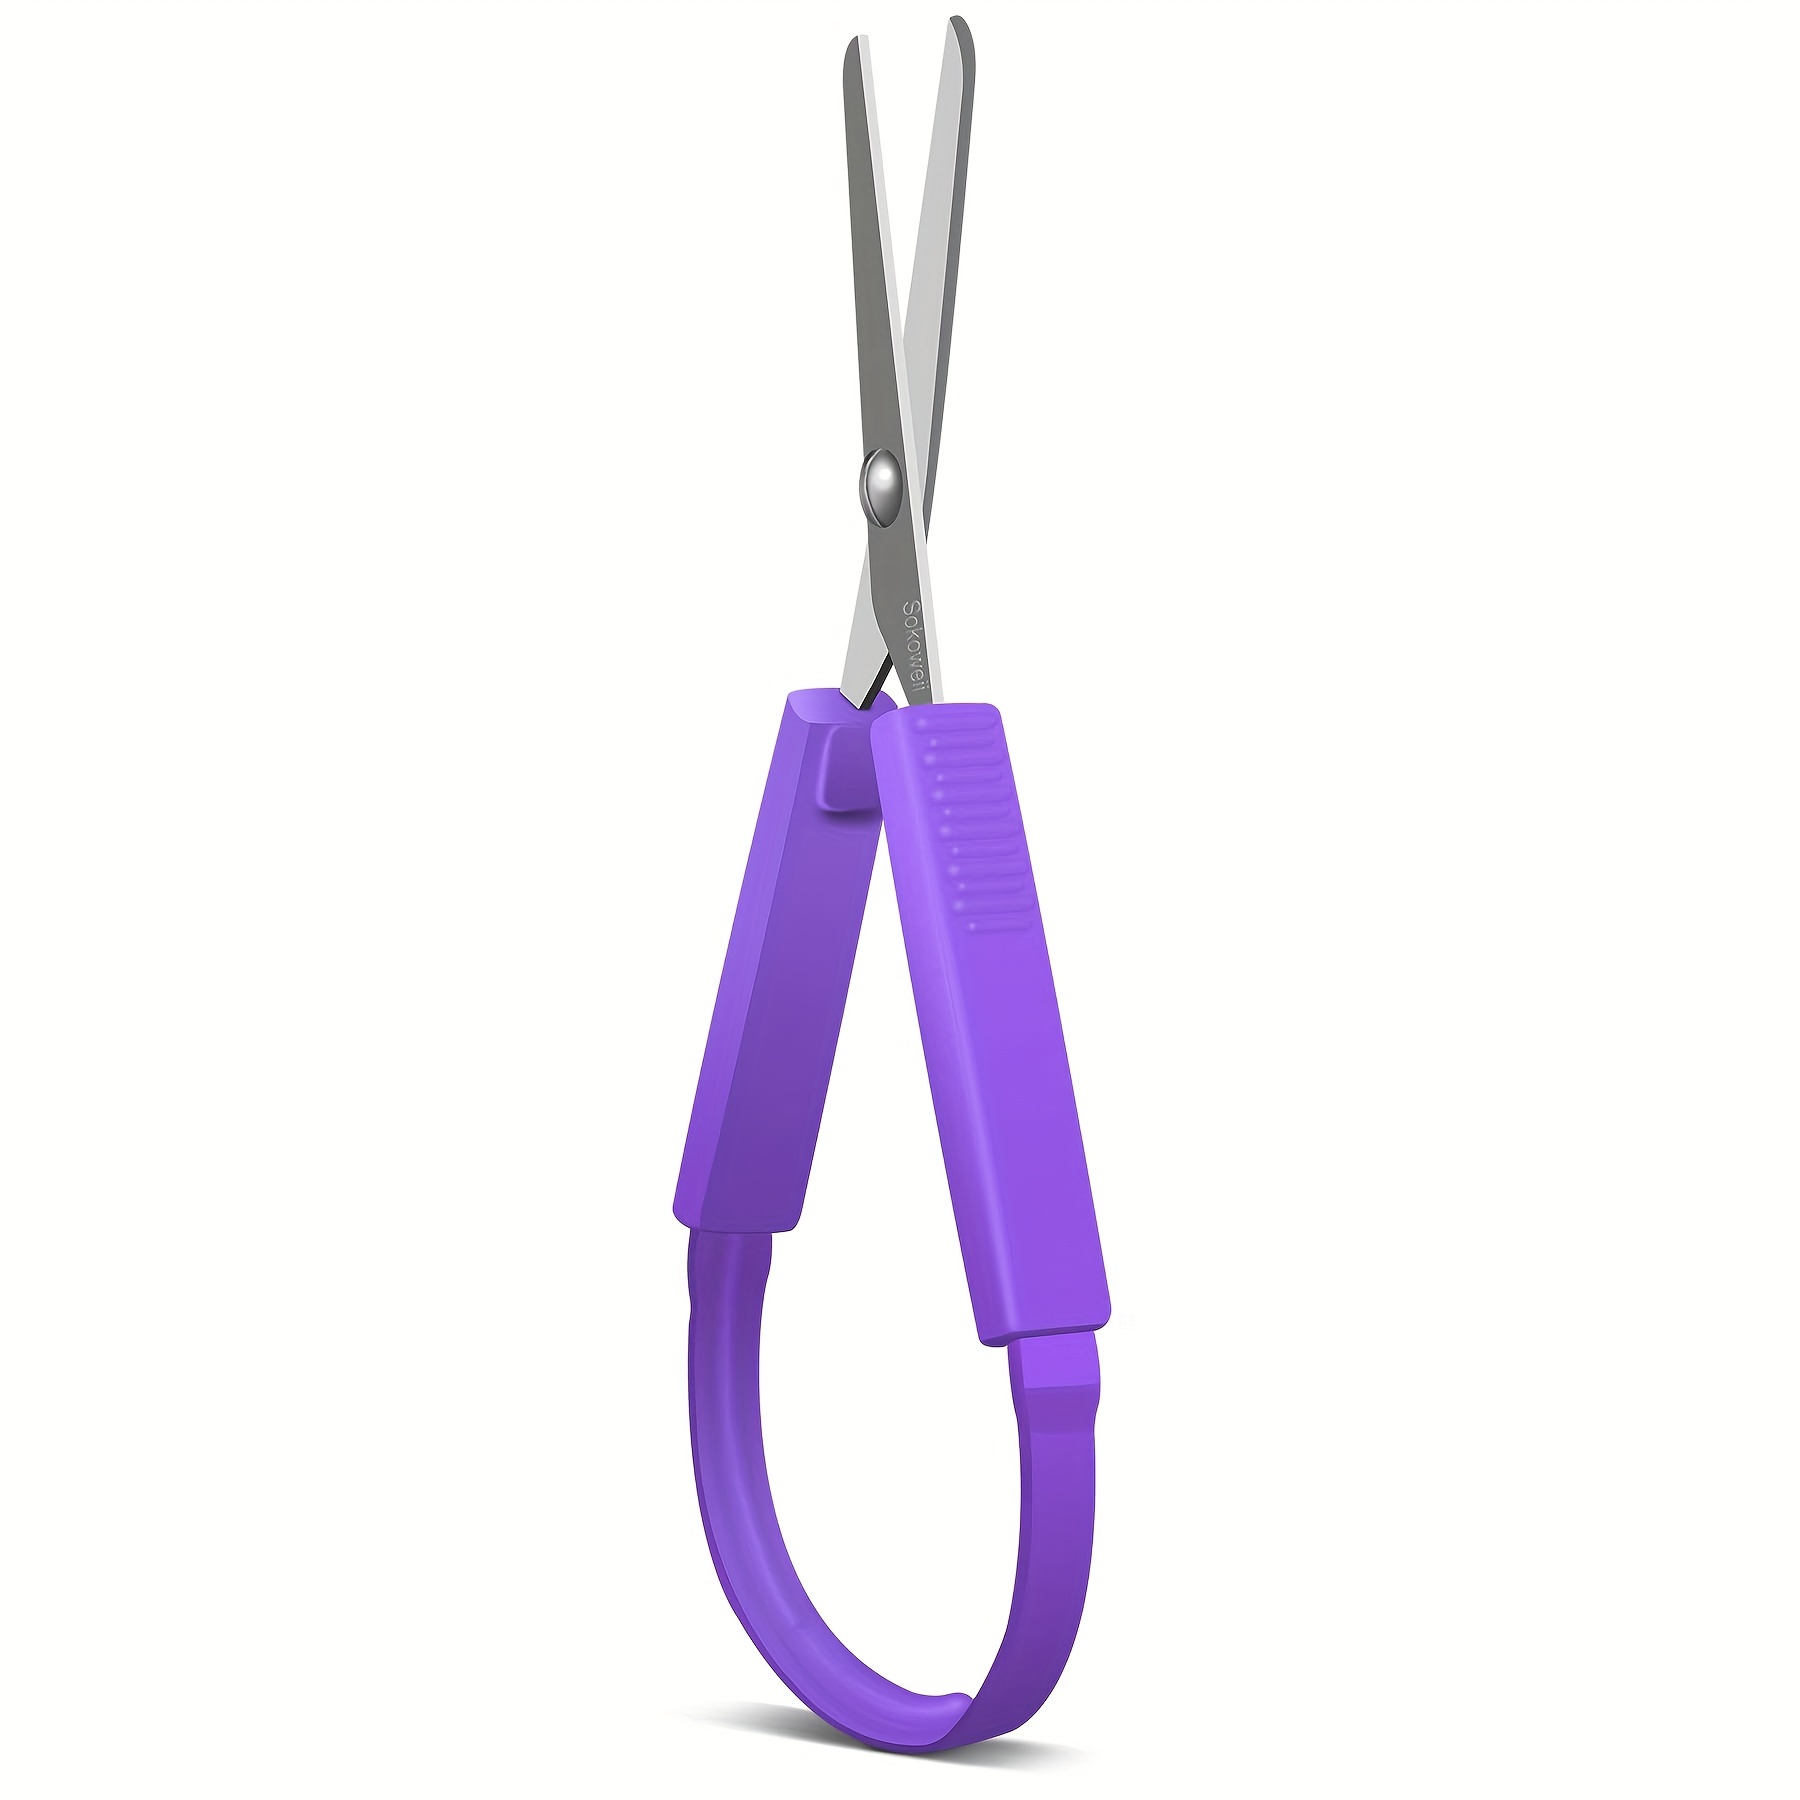 Sokoweii Mini Loop Scissors for Toddlers, 5 Inch Adaptive Design, Right and  Lefty Support, Easy-Open Squeeze Handles -3PCS